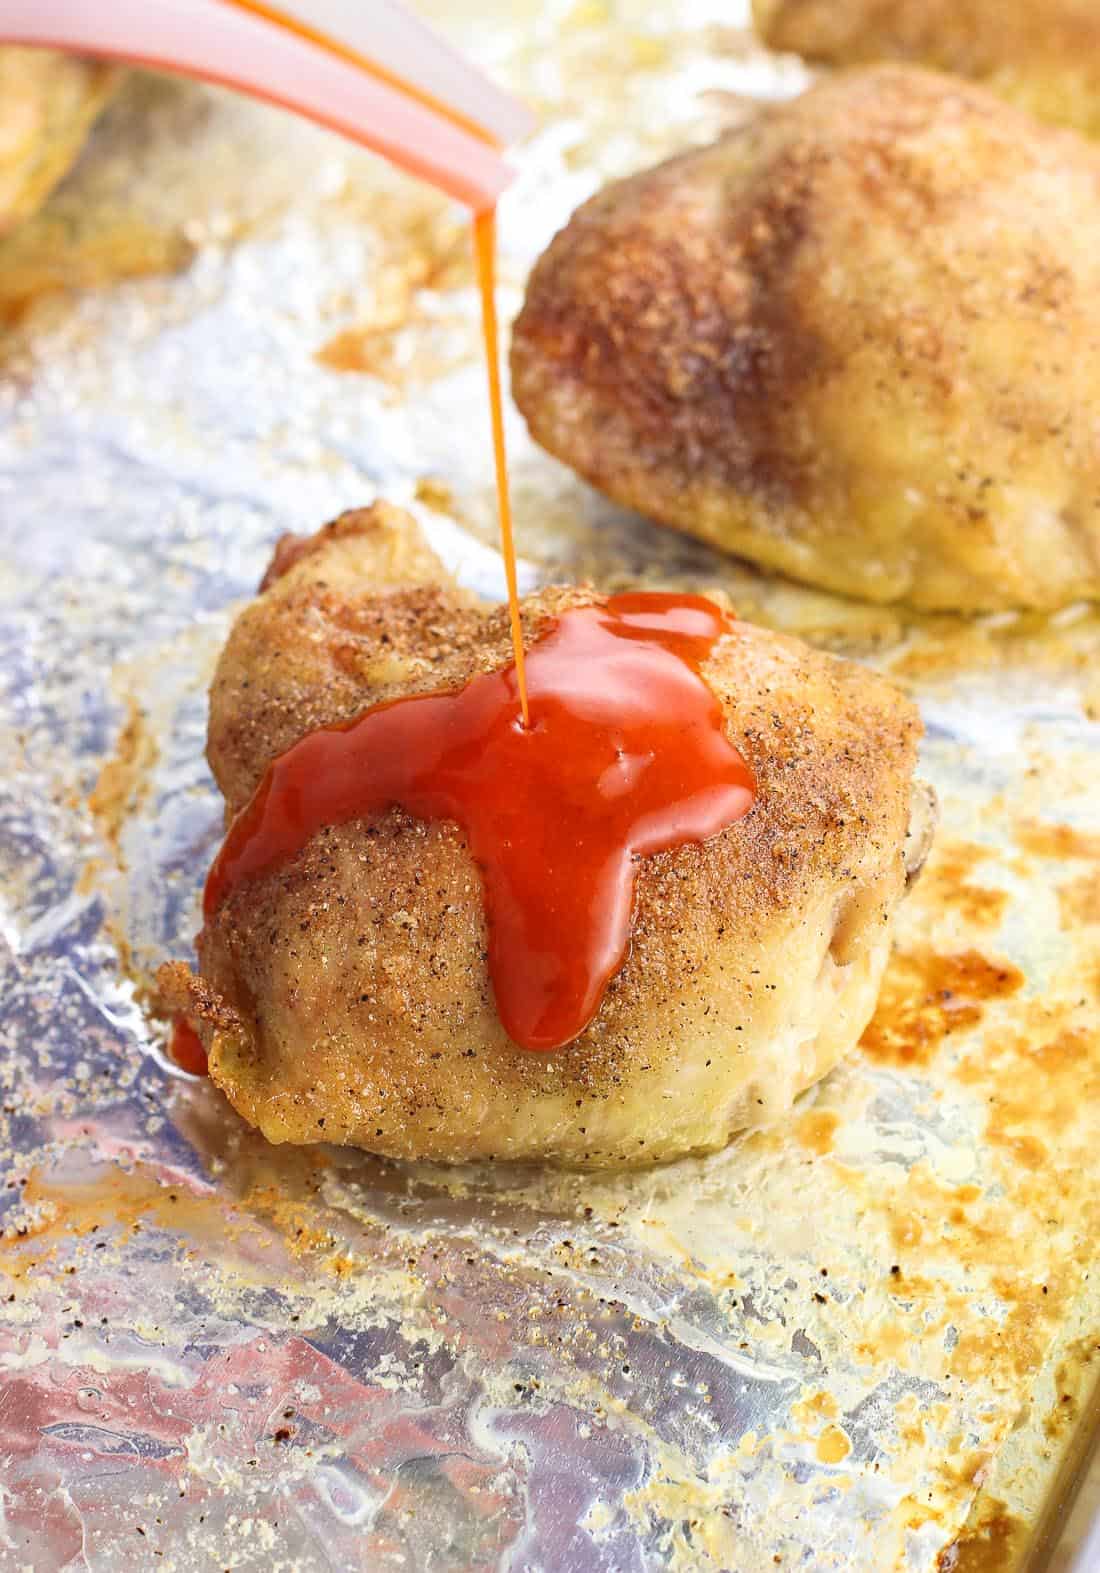 A thin stream of buffalo sauce being drizzled onto a cooked chicken thigh.